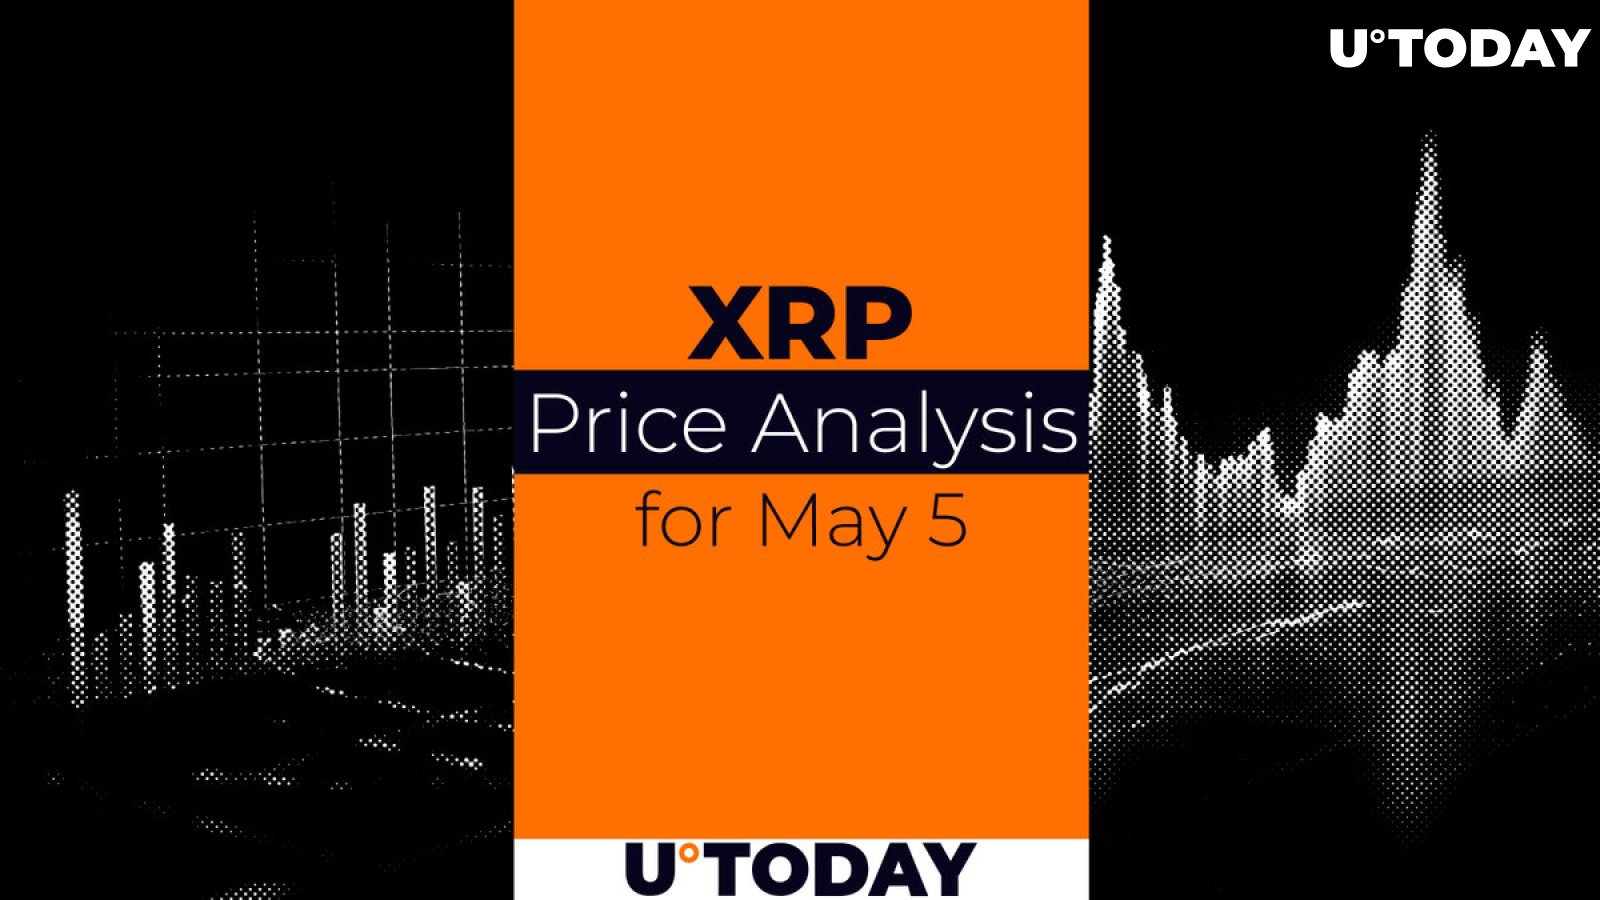 XRP Price Prediction for May 5